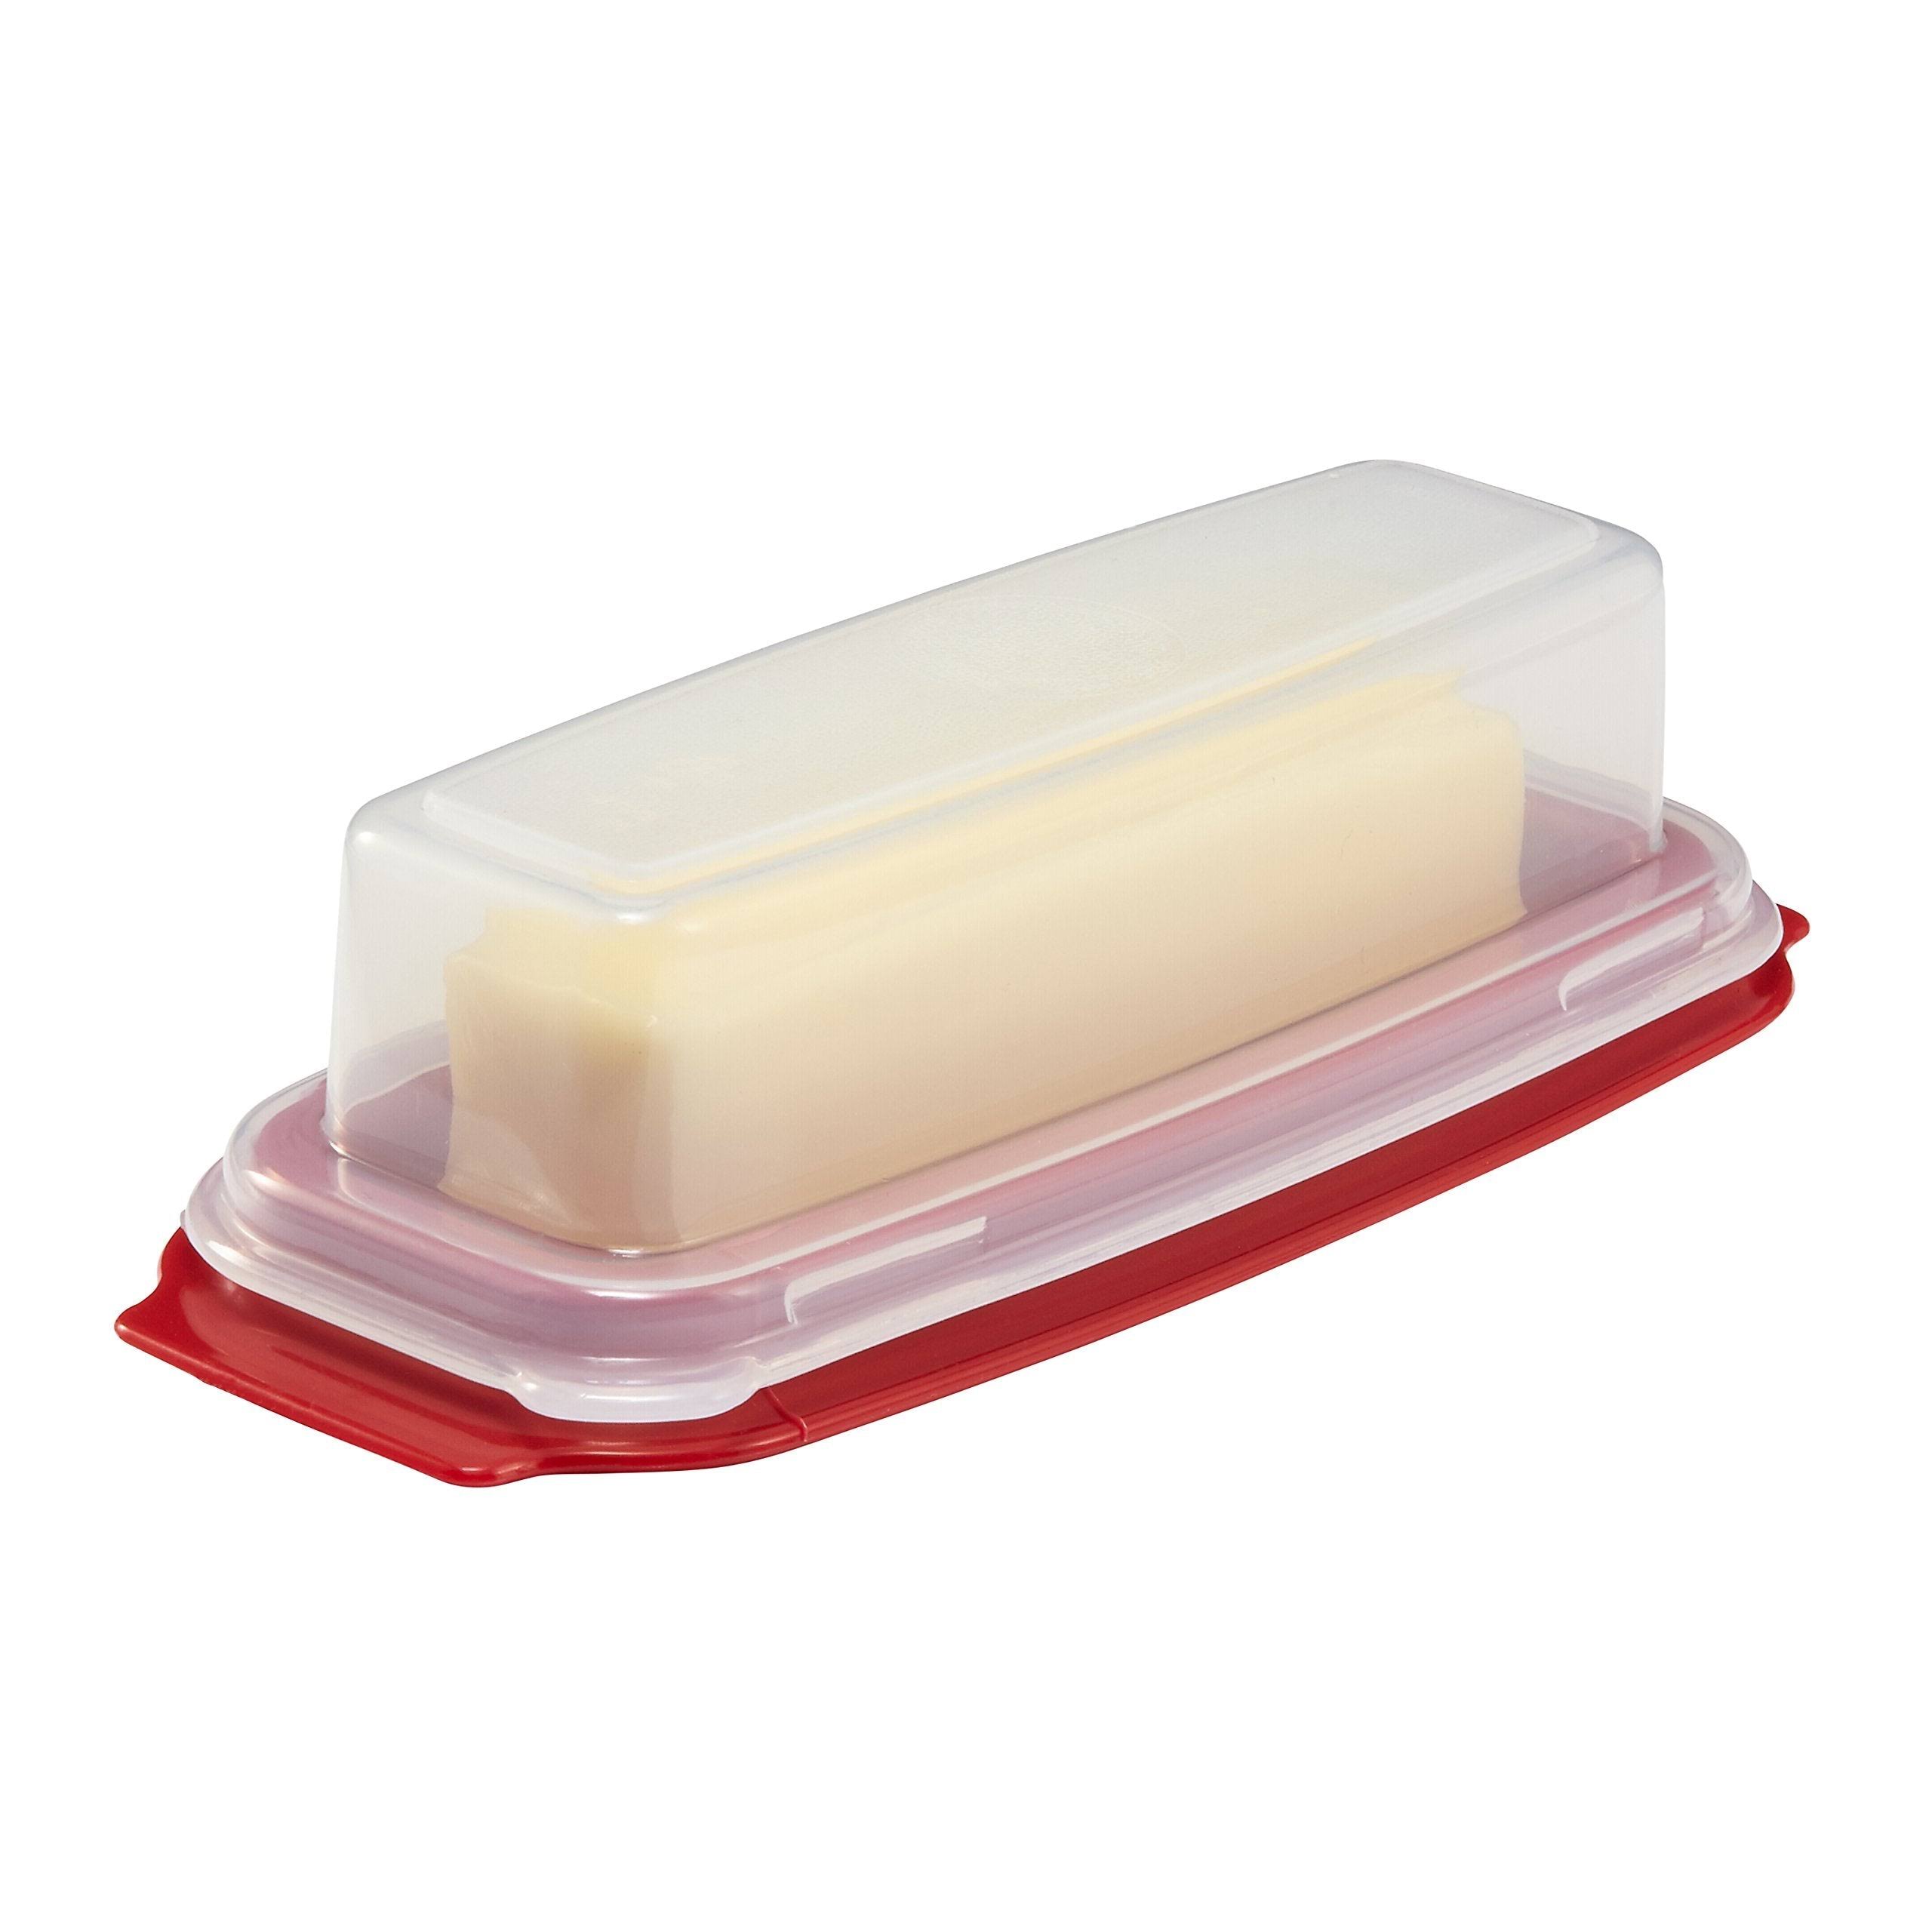 Rubbermaid Butter Dish - Opaque, Red Base